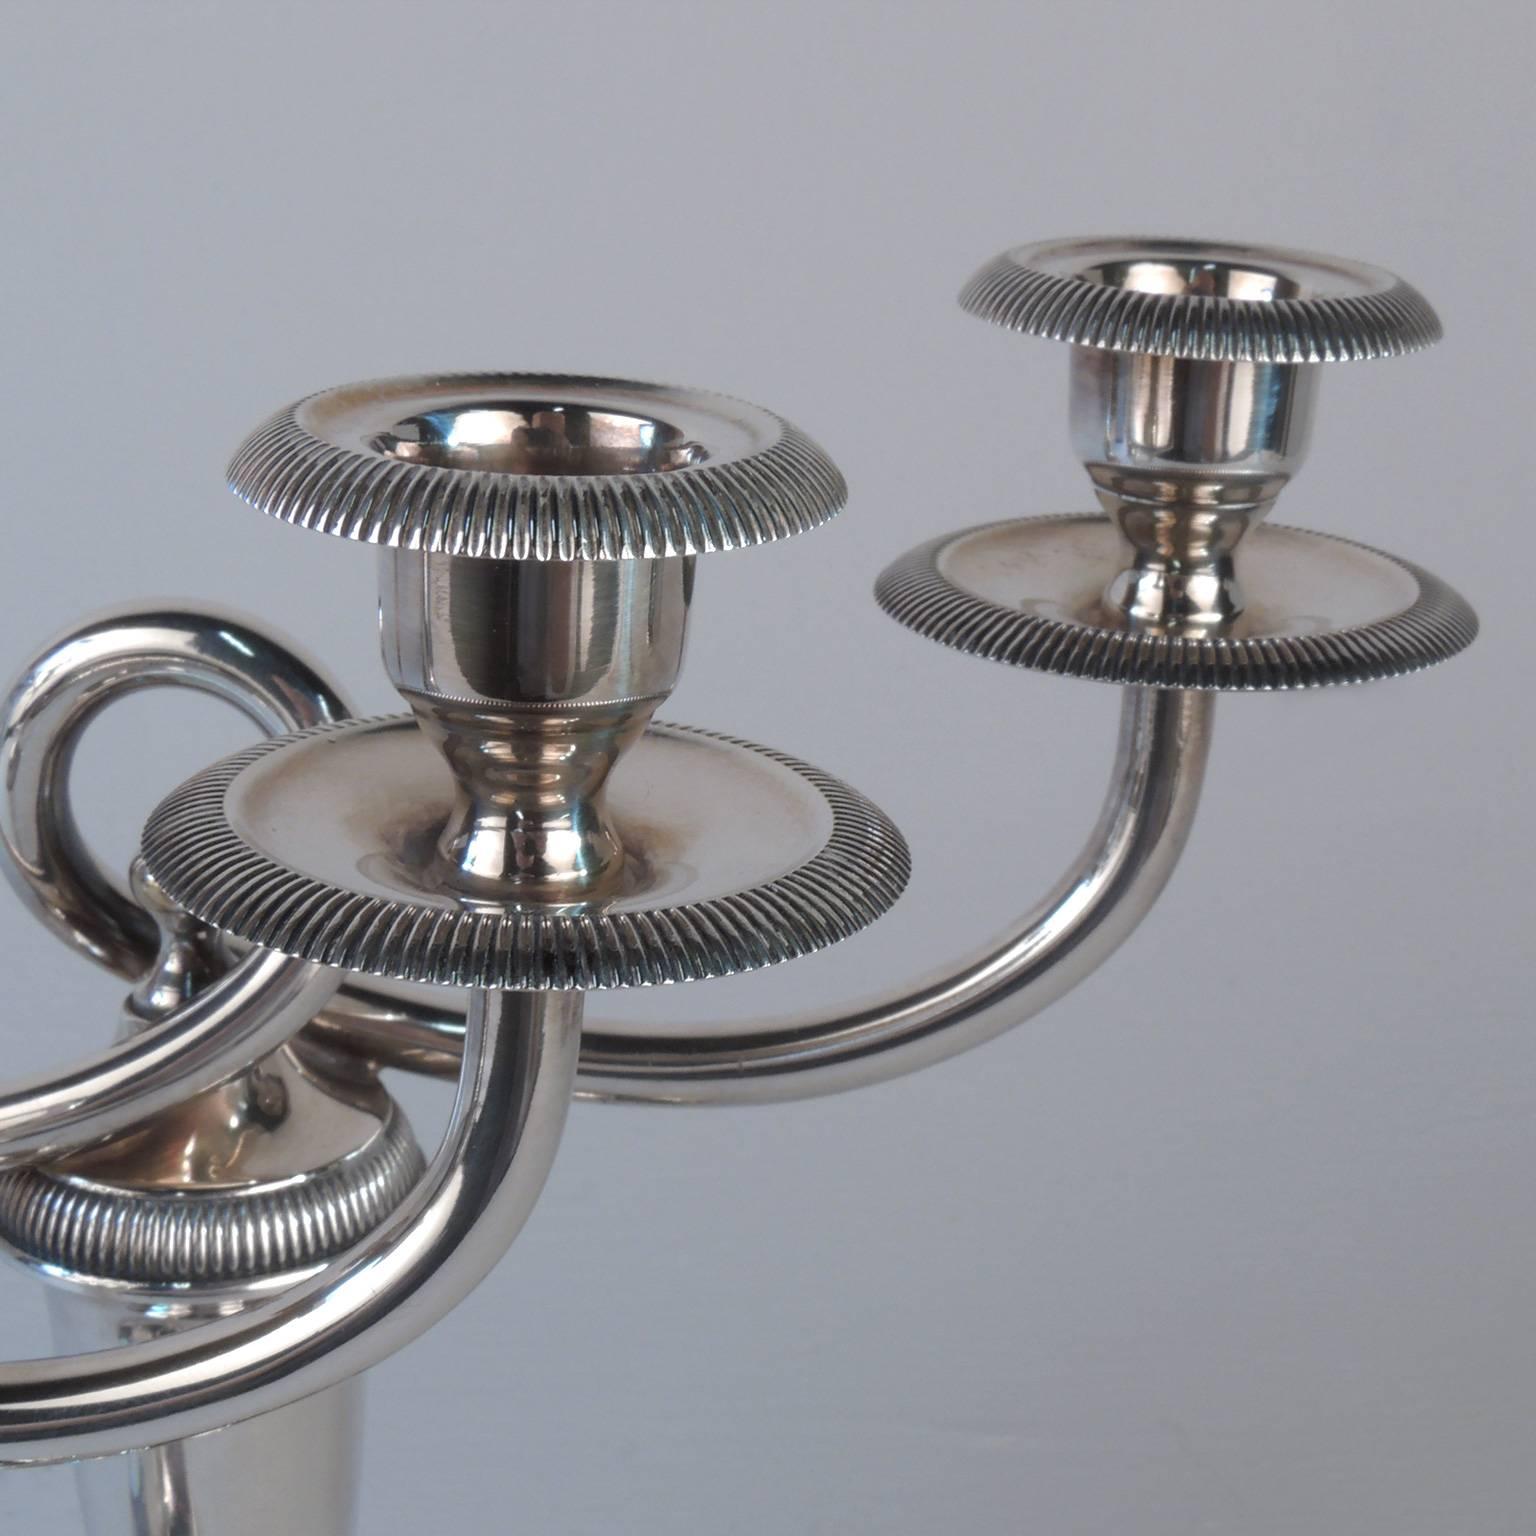 A fine pair of twin-light candle holders by Christofle.

With full twist arms and reeded edges repeated throughout the design.

Fully hallmarked to the underside of the arms.

Width: ca. 9 1/2 in.

Items purchased from David Sterner antiques